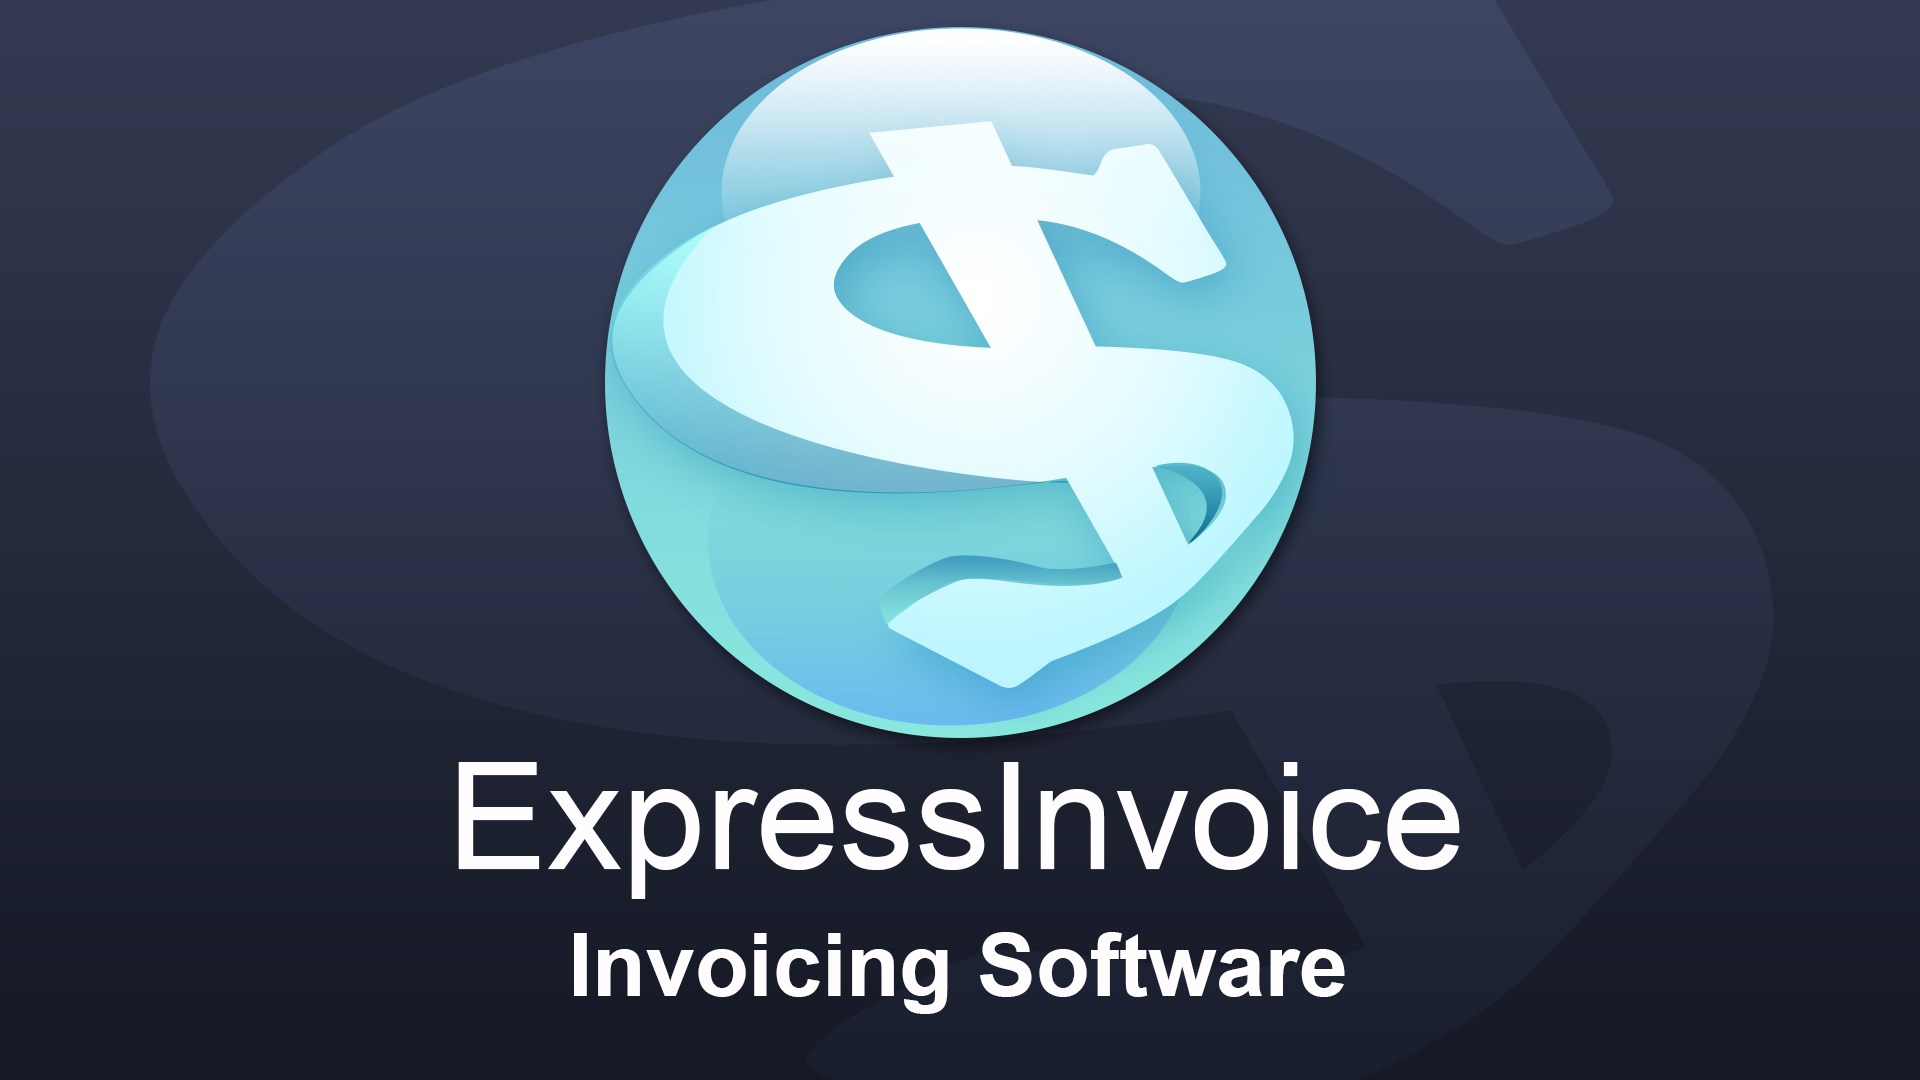 NCH: Express Invoice Invoicing Key [USD 203.62]